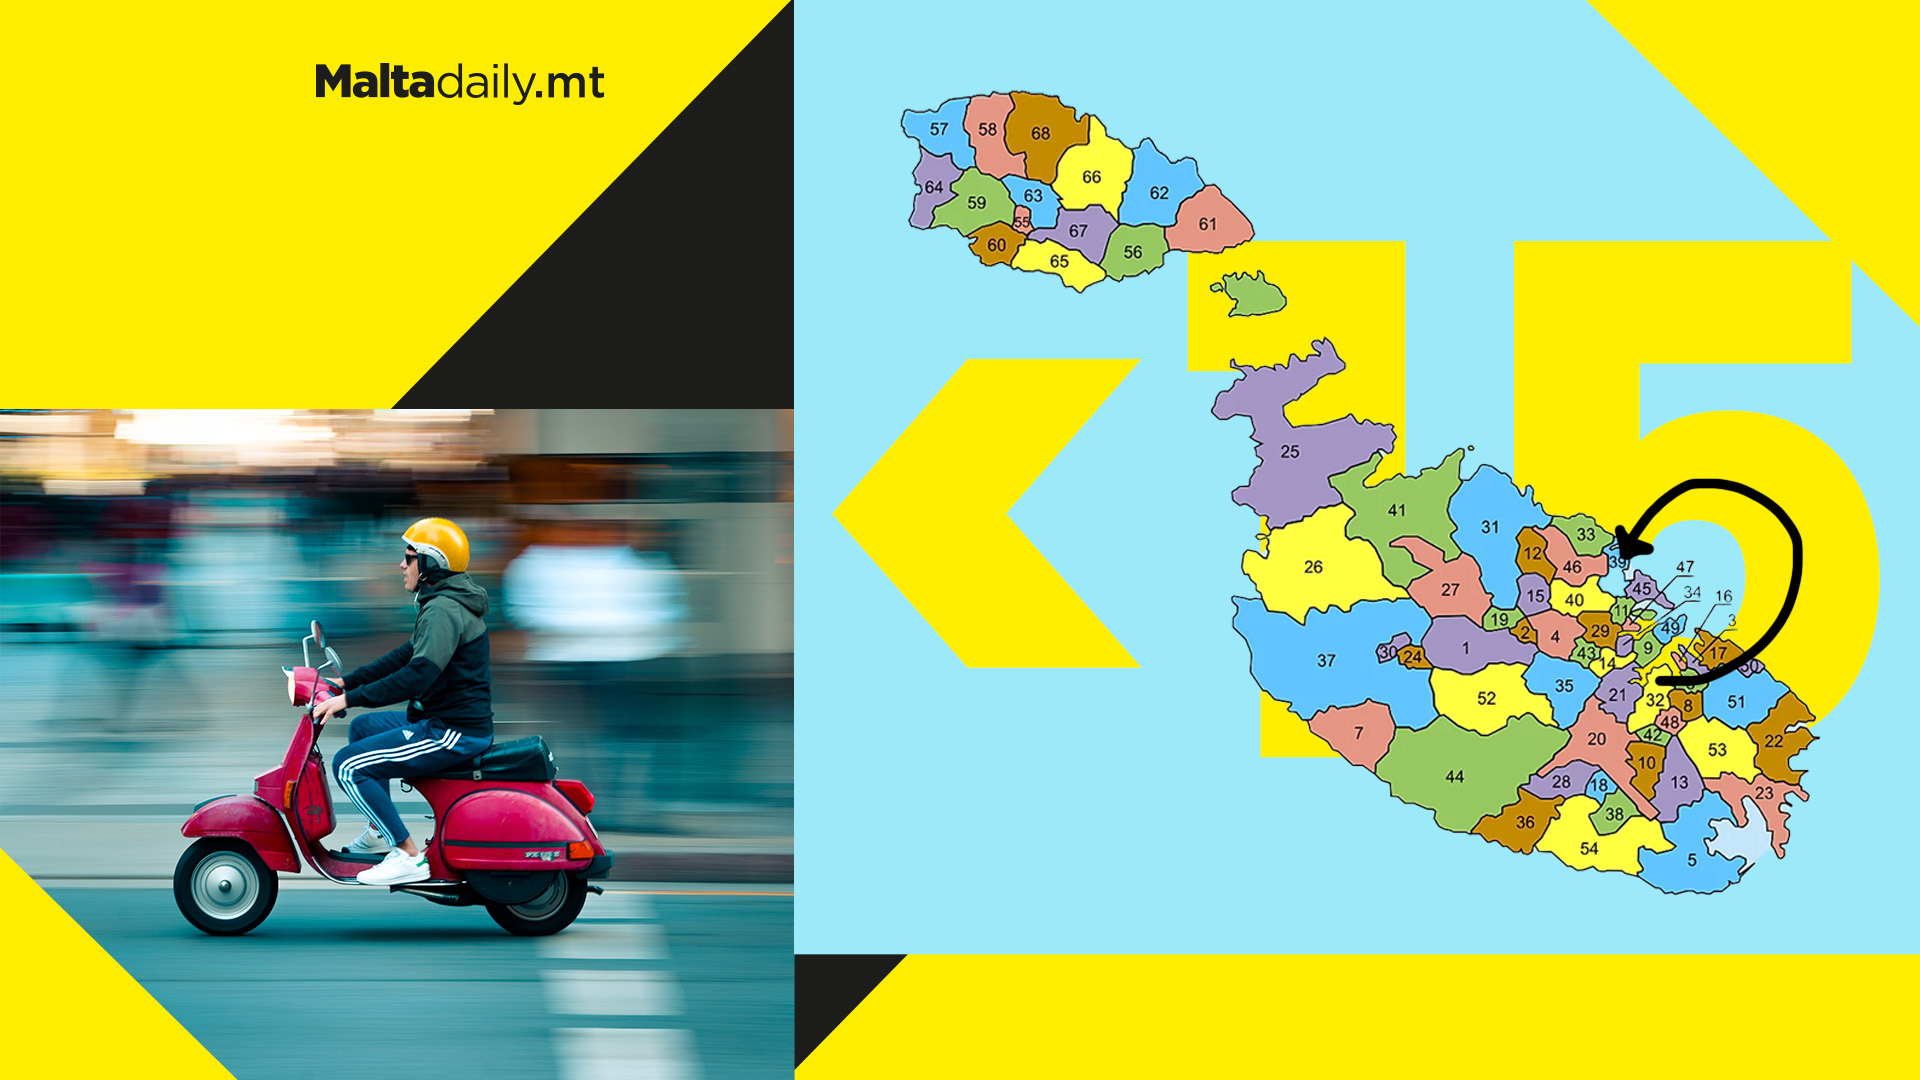 Paola to St. Julian's in less than 15 minutes: Motorcyclist shows how to beat Malta's traffic